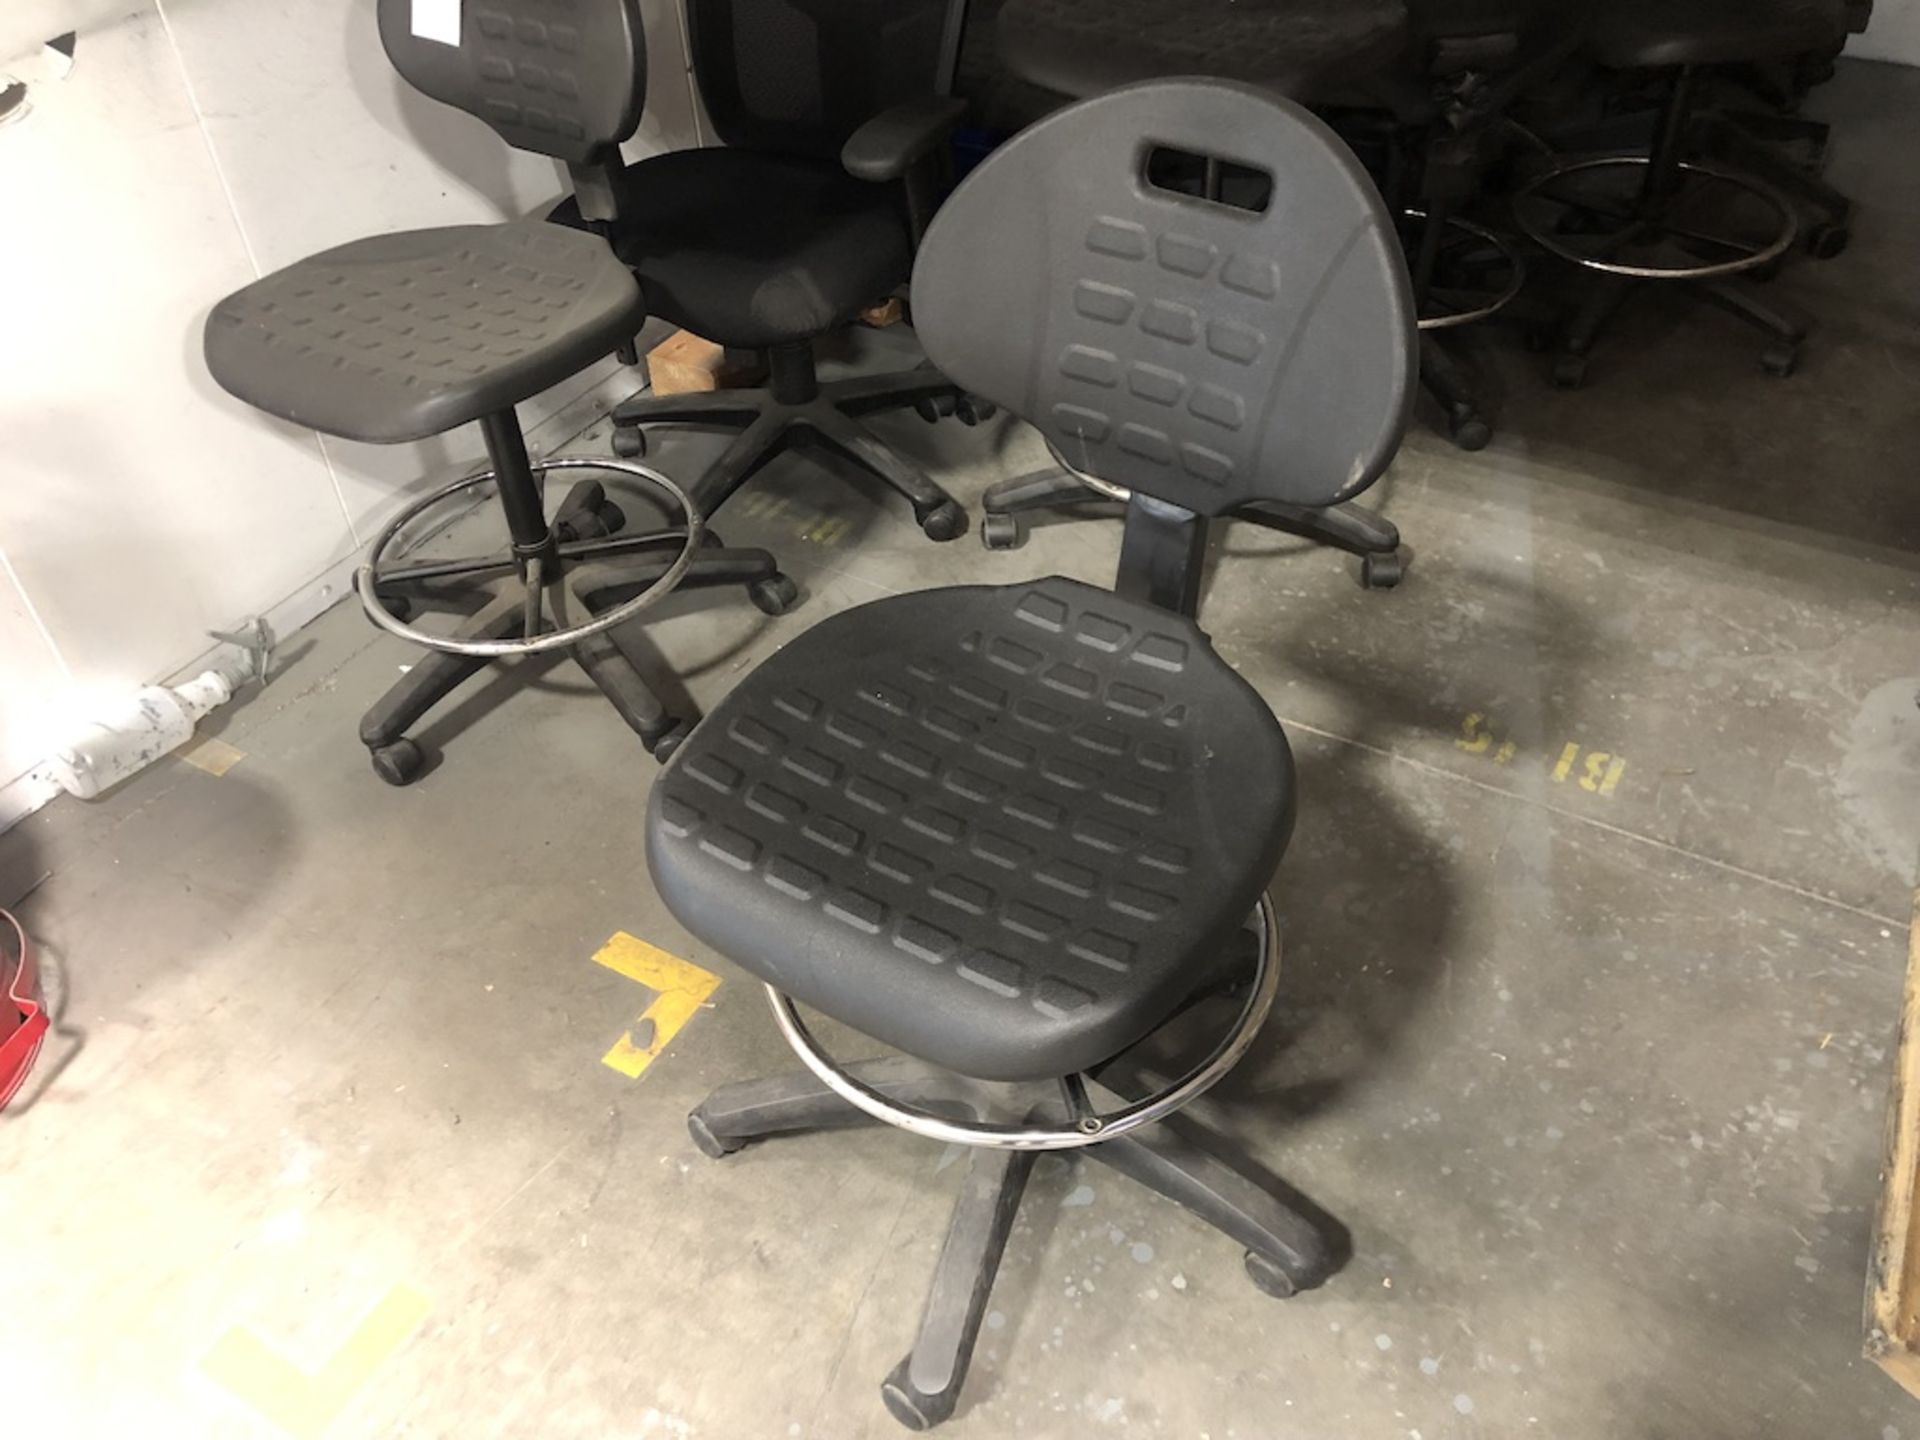 5 CASTER BLACK OFFICE CHAIR - Image 3 of 4